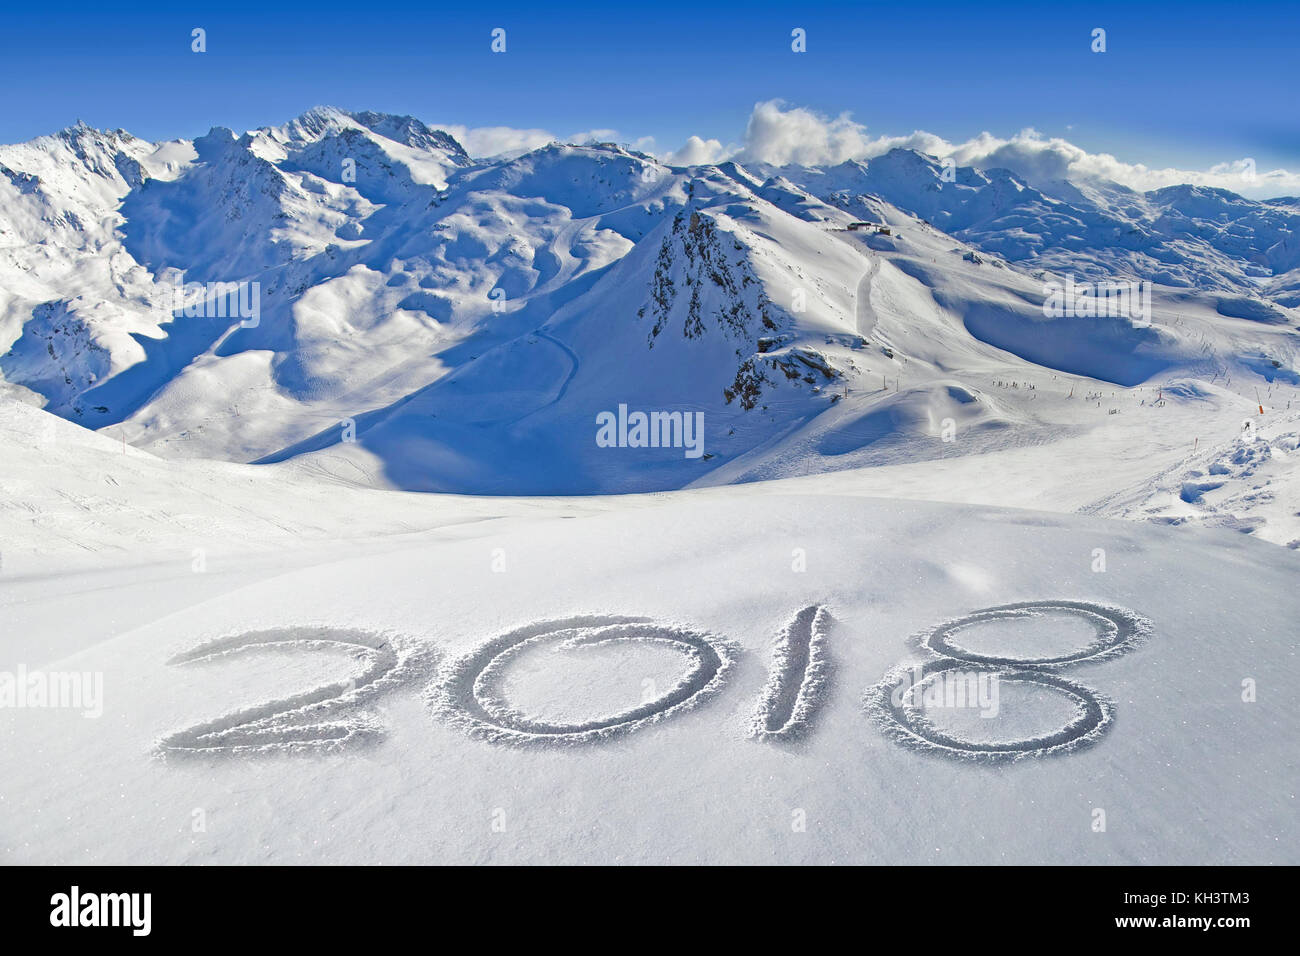 2018 written in the snow, mountain landscape in the background Stock Photo